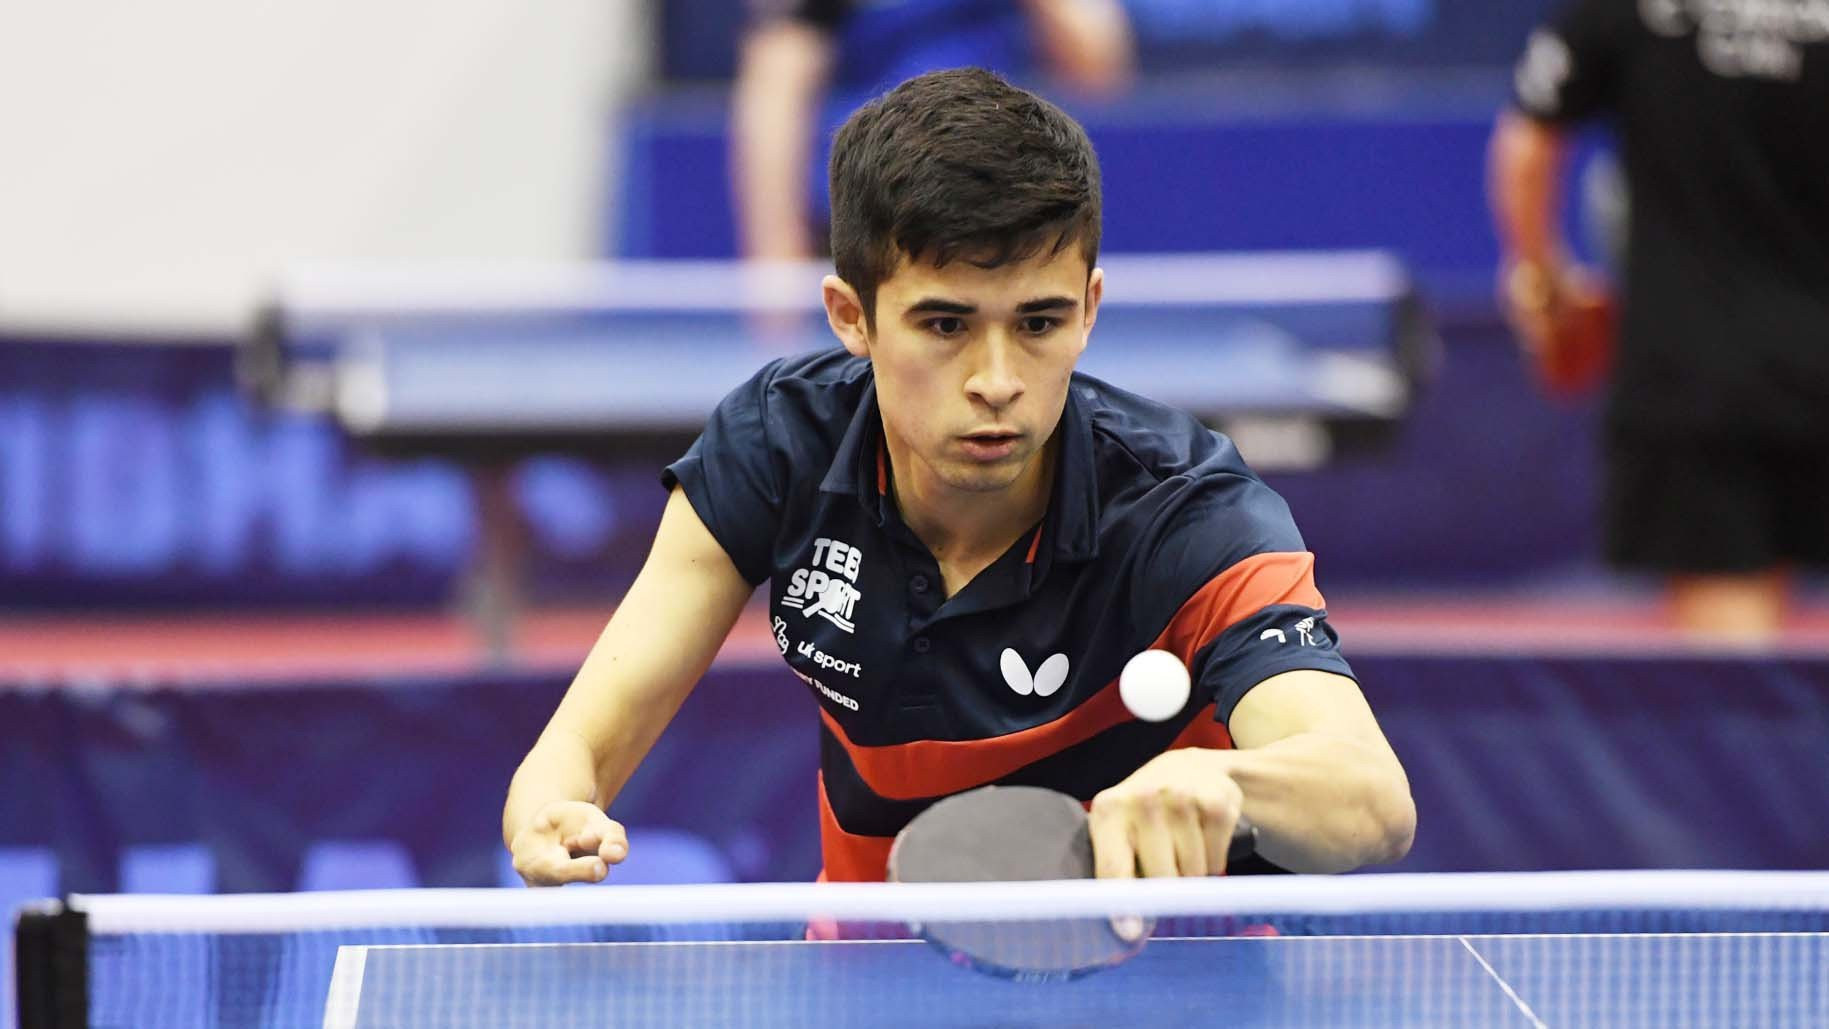 Britain's Gold Coast Commonwealth Games silver medallist Kim Daybell was unable to prevent Poland earning a 2-0 win in their class 10 match today as team play started at the ITTF Para European Championships in Sweden ©ITTF